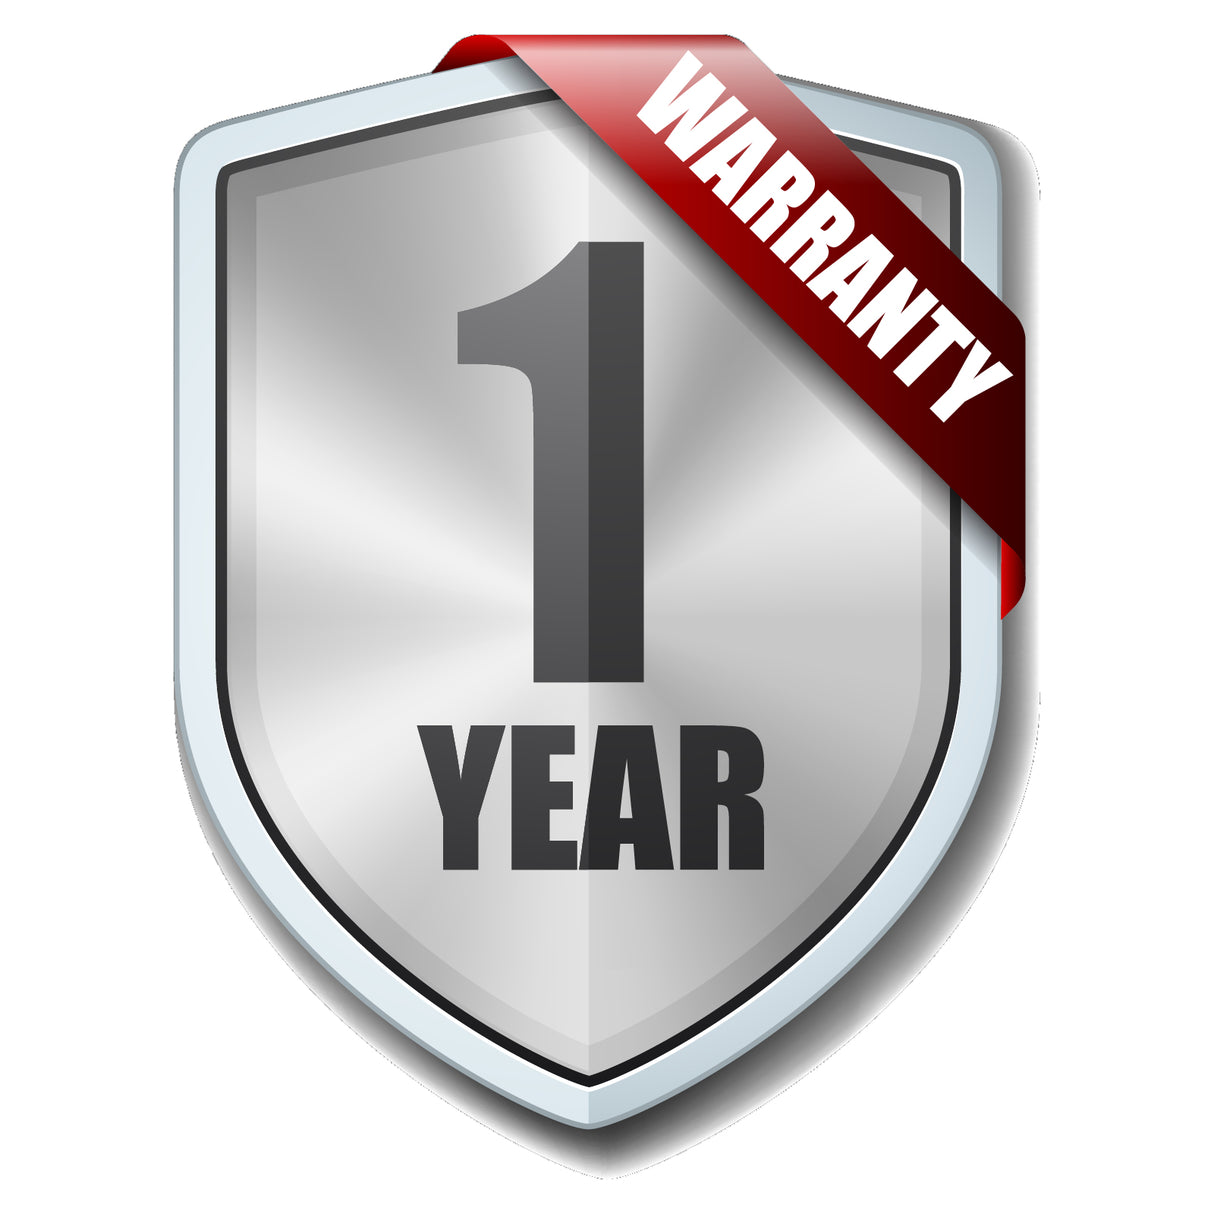 Liftmaster 1-year warranty by Elite that that comes with bundle